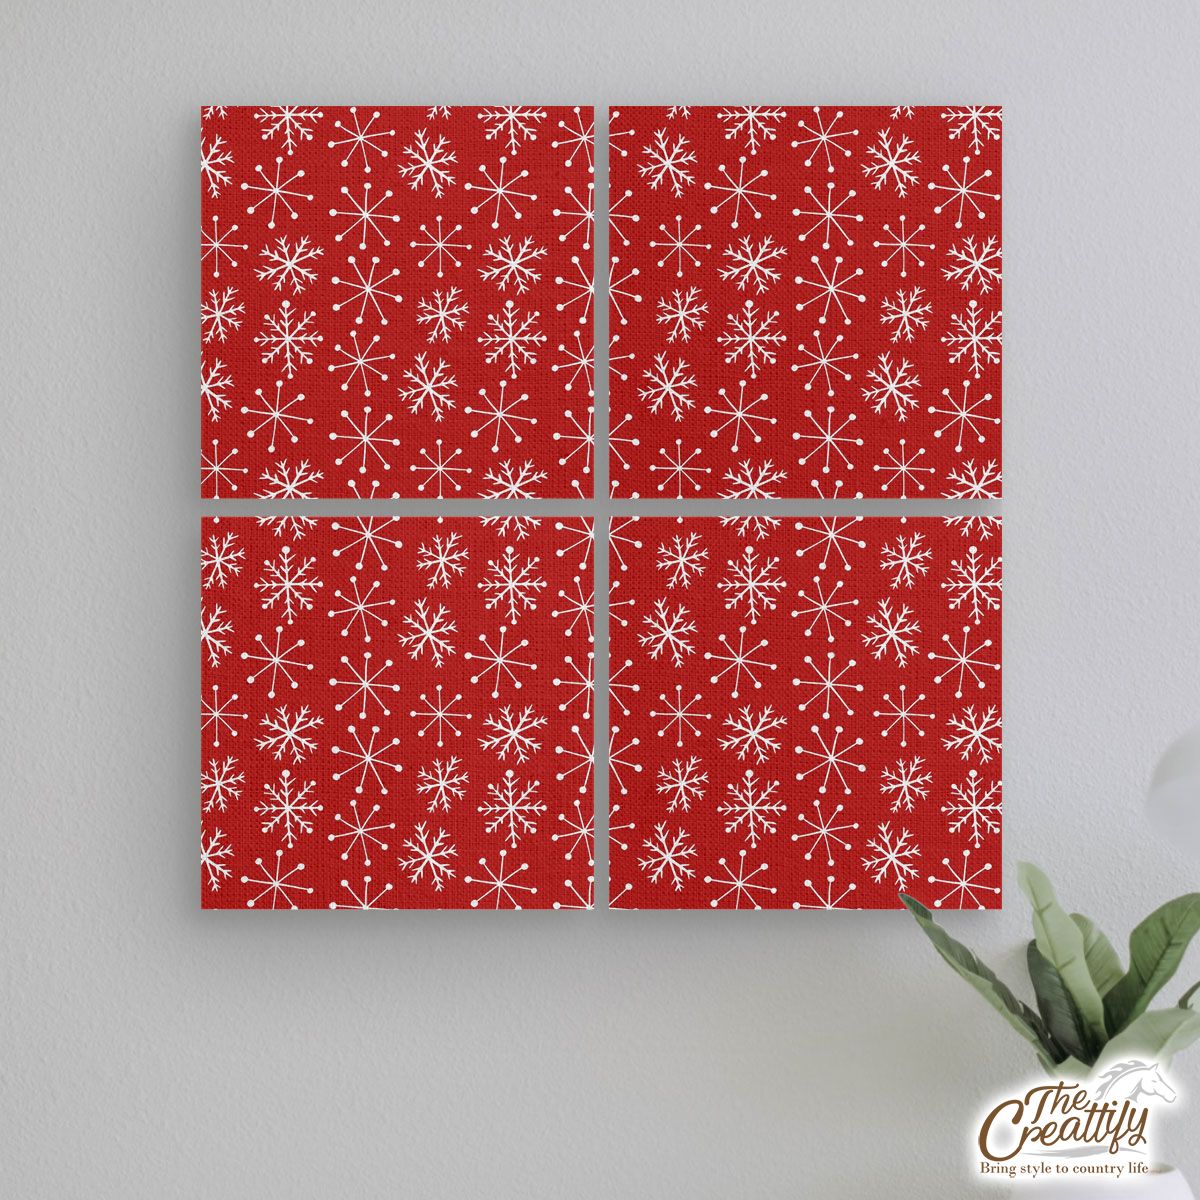 White Snowflake Seamless Pattern 2 Mural With Frame